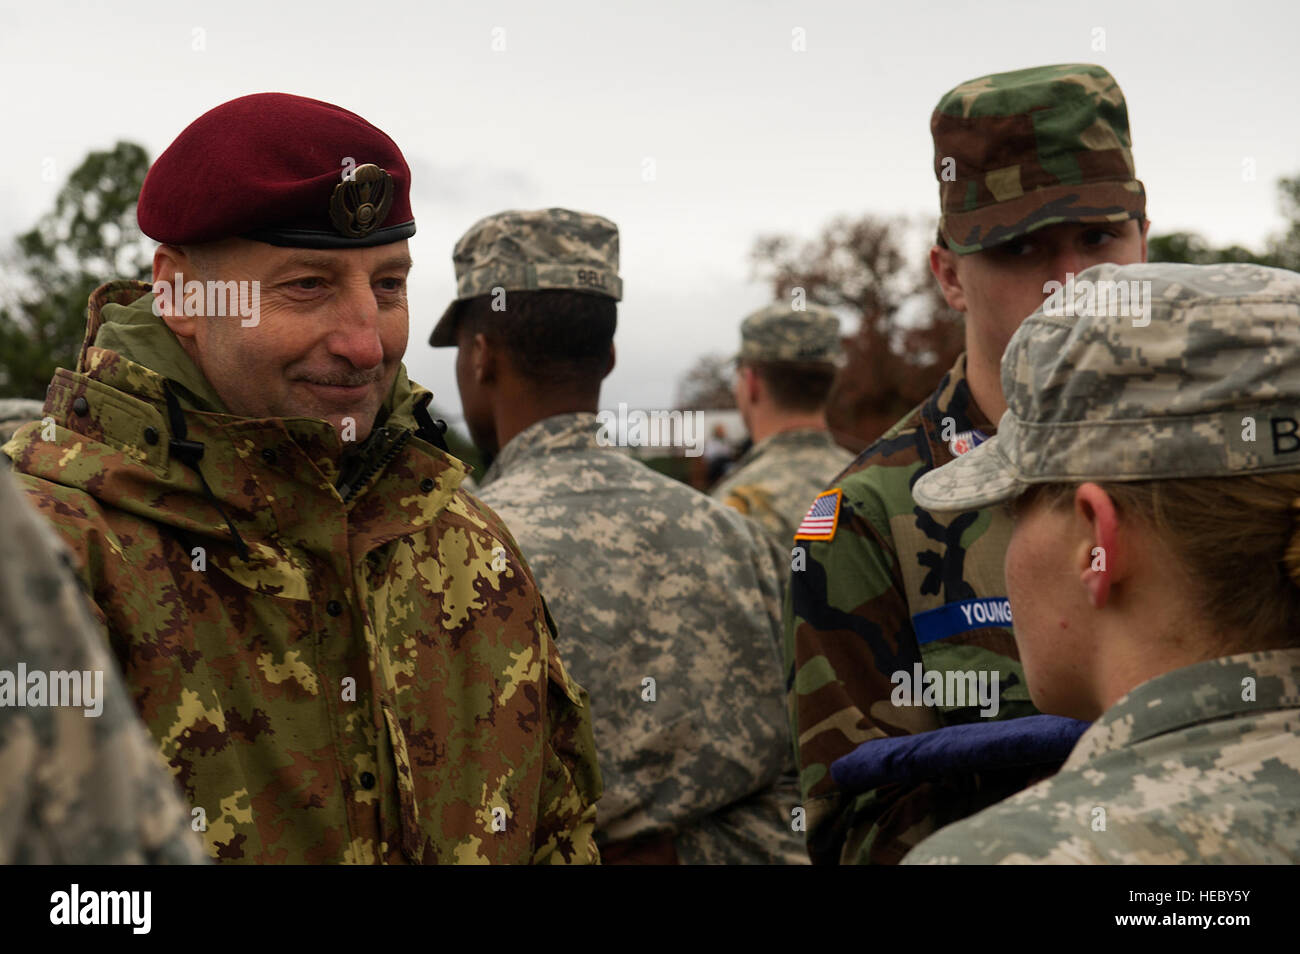 Cpl. Mauro Alasia, Italian Army paratrooper, pins on Italian jump wings to U.S. Army paratroopers after following the command of the Italian jumpmasters, Fort Bragg, N.C., Dec. 7, 2013. The 16th Annual Randy Oler Operation Toy Drop, hosted by the U.S. army Civil Affairs & Psychological Operations Command (Airborne), is the largest combined airborne operation in the world where Fort Bragg's paratroopers and allied jumpmasters donate toys to be distributed to children's homes and social service agencies across the local community.  (U.S. Air Force photo by Airman 1st Class Logan Brandt) Stock Photo